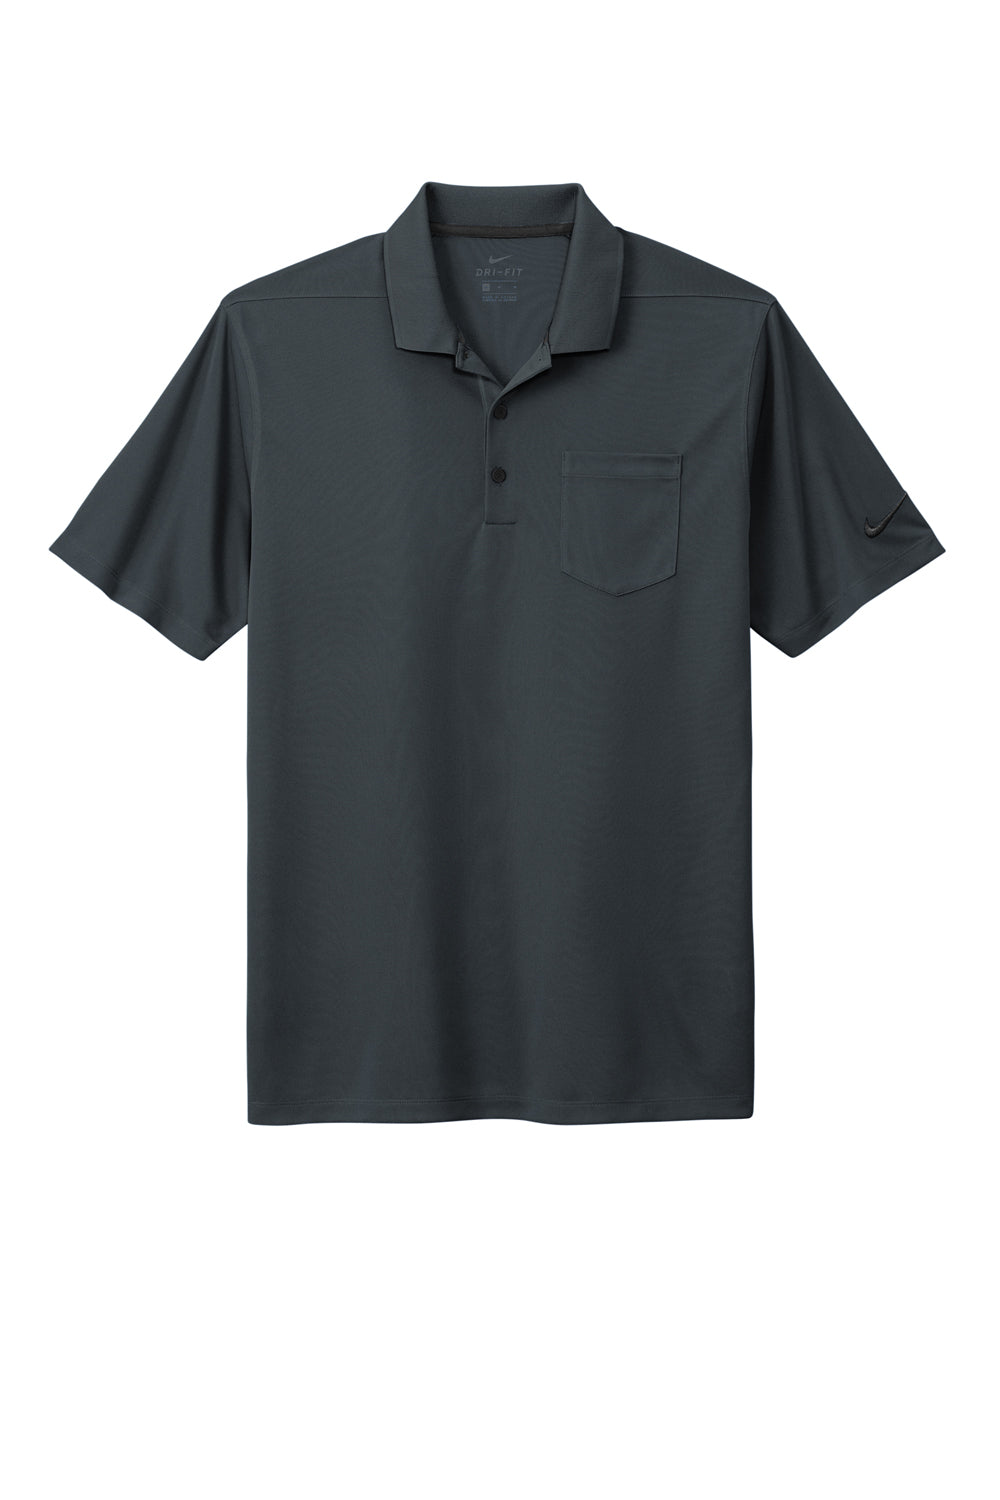 Nike NKDC2103 Mens Dri-Fit Moisture Wicking Micro Pique 2.0 Short Sleeve Polo Shirt w/ Pocket Anthracite Grey Flat Front